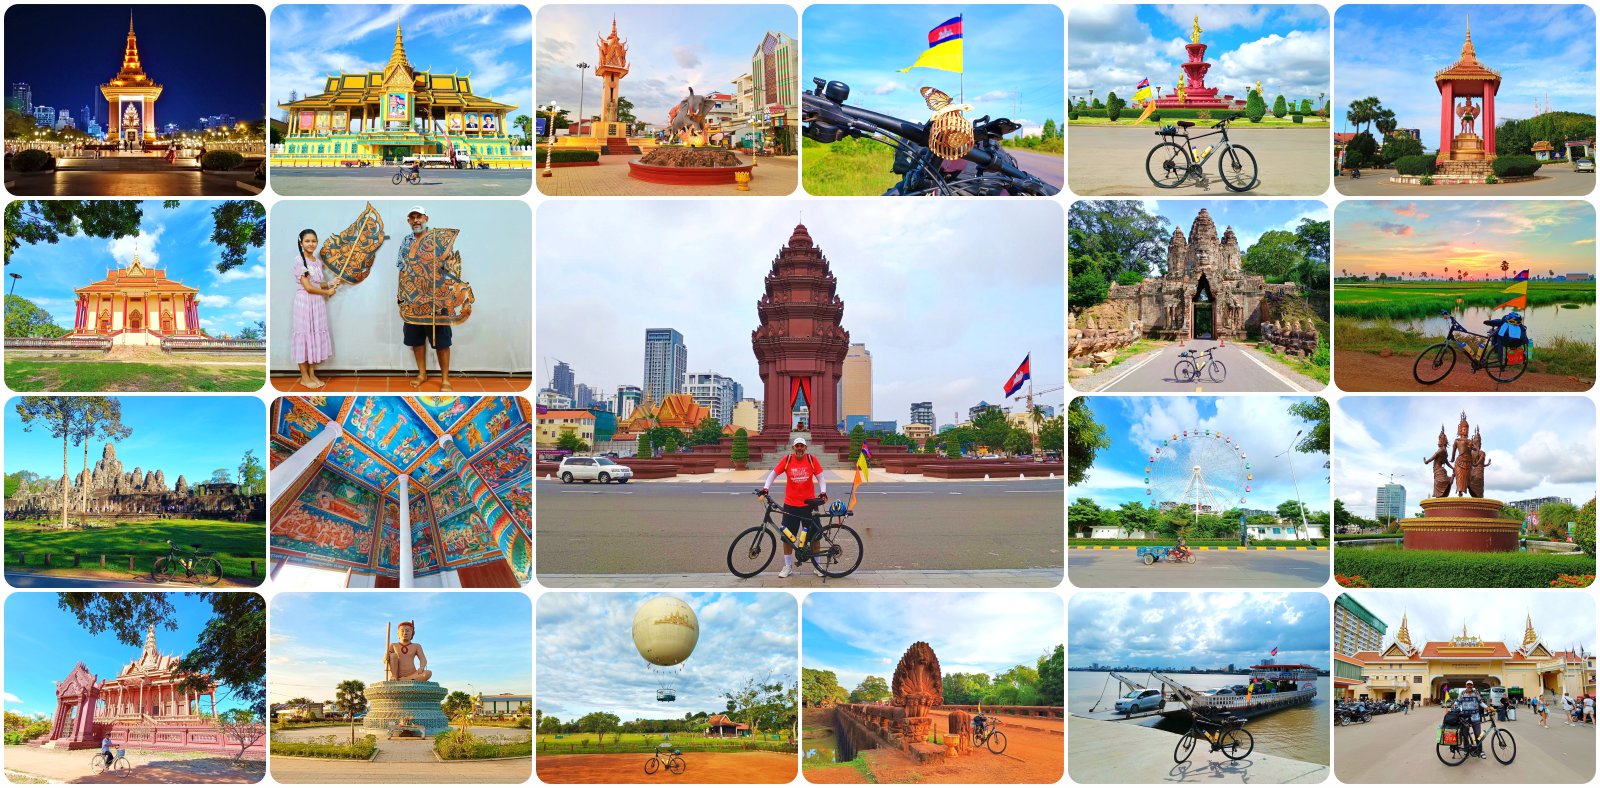 Pedals and Pagodas: Exploring Cambodia’s Heritage on Two Wheels